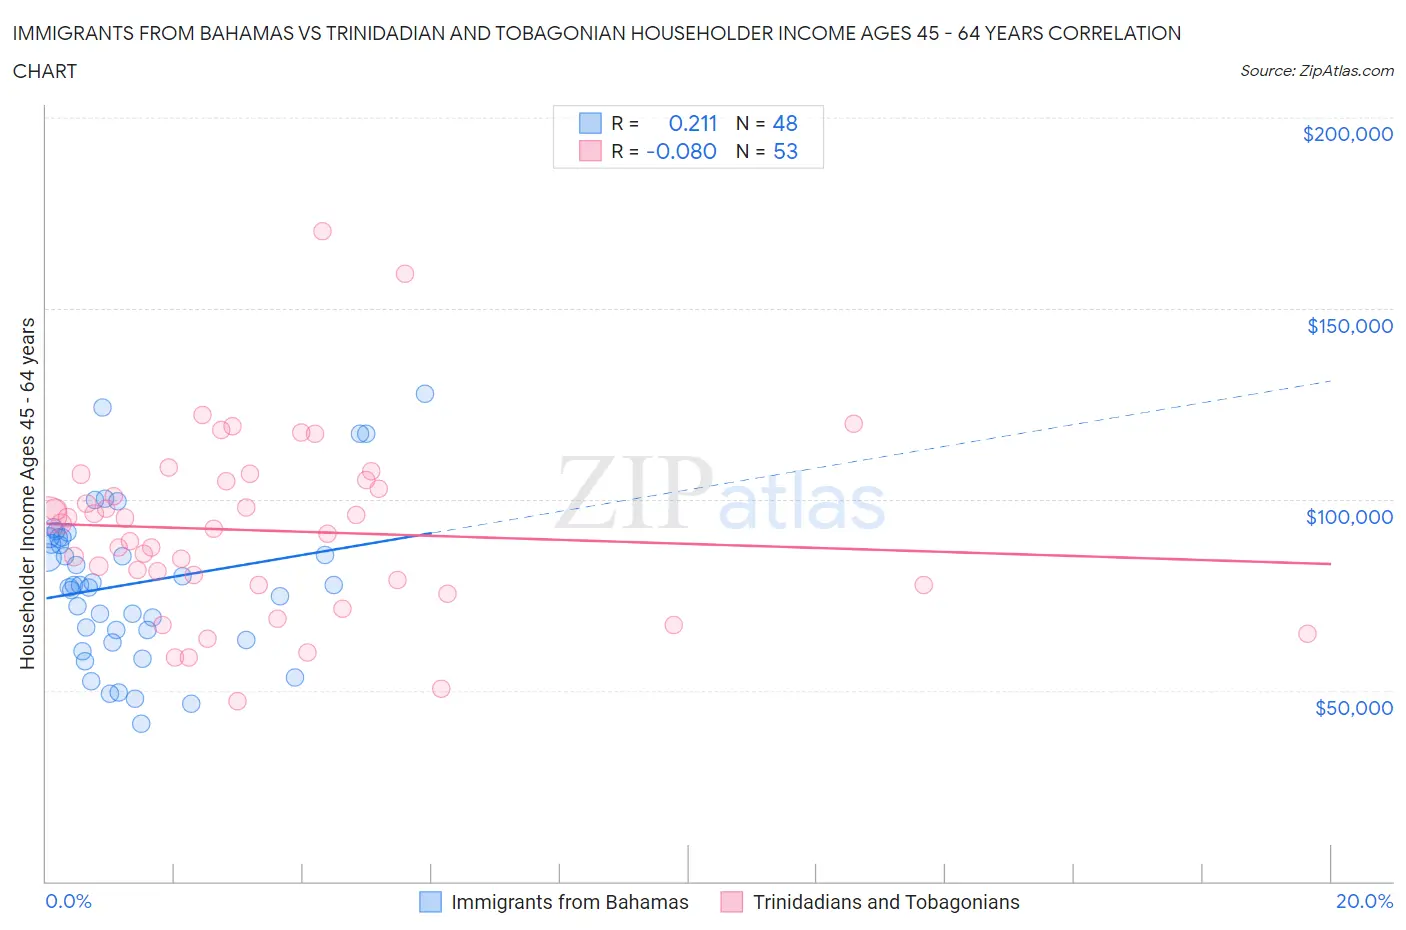 Immigrants from Bahamas vs Trinidadian and Tobagonian Householder Income Ages 45 - 64 years